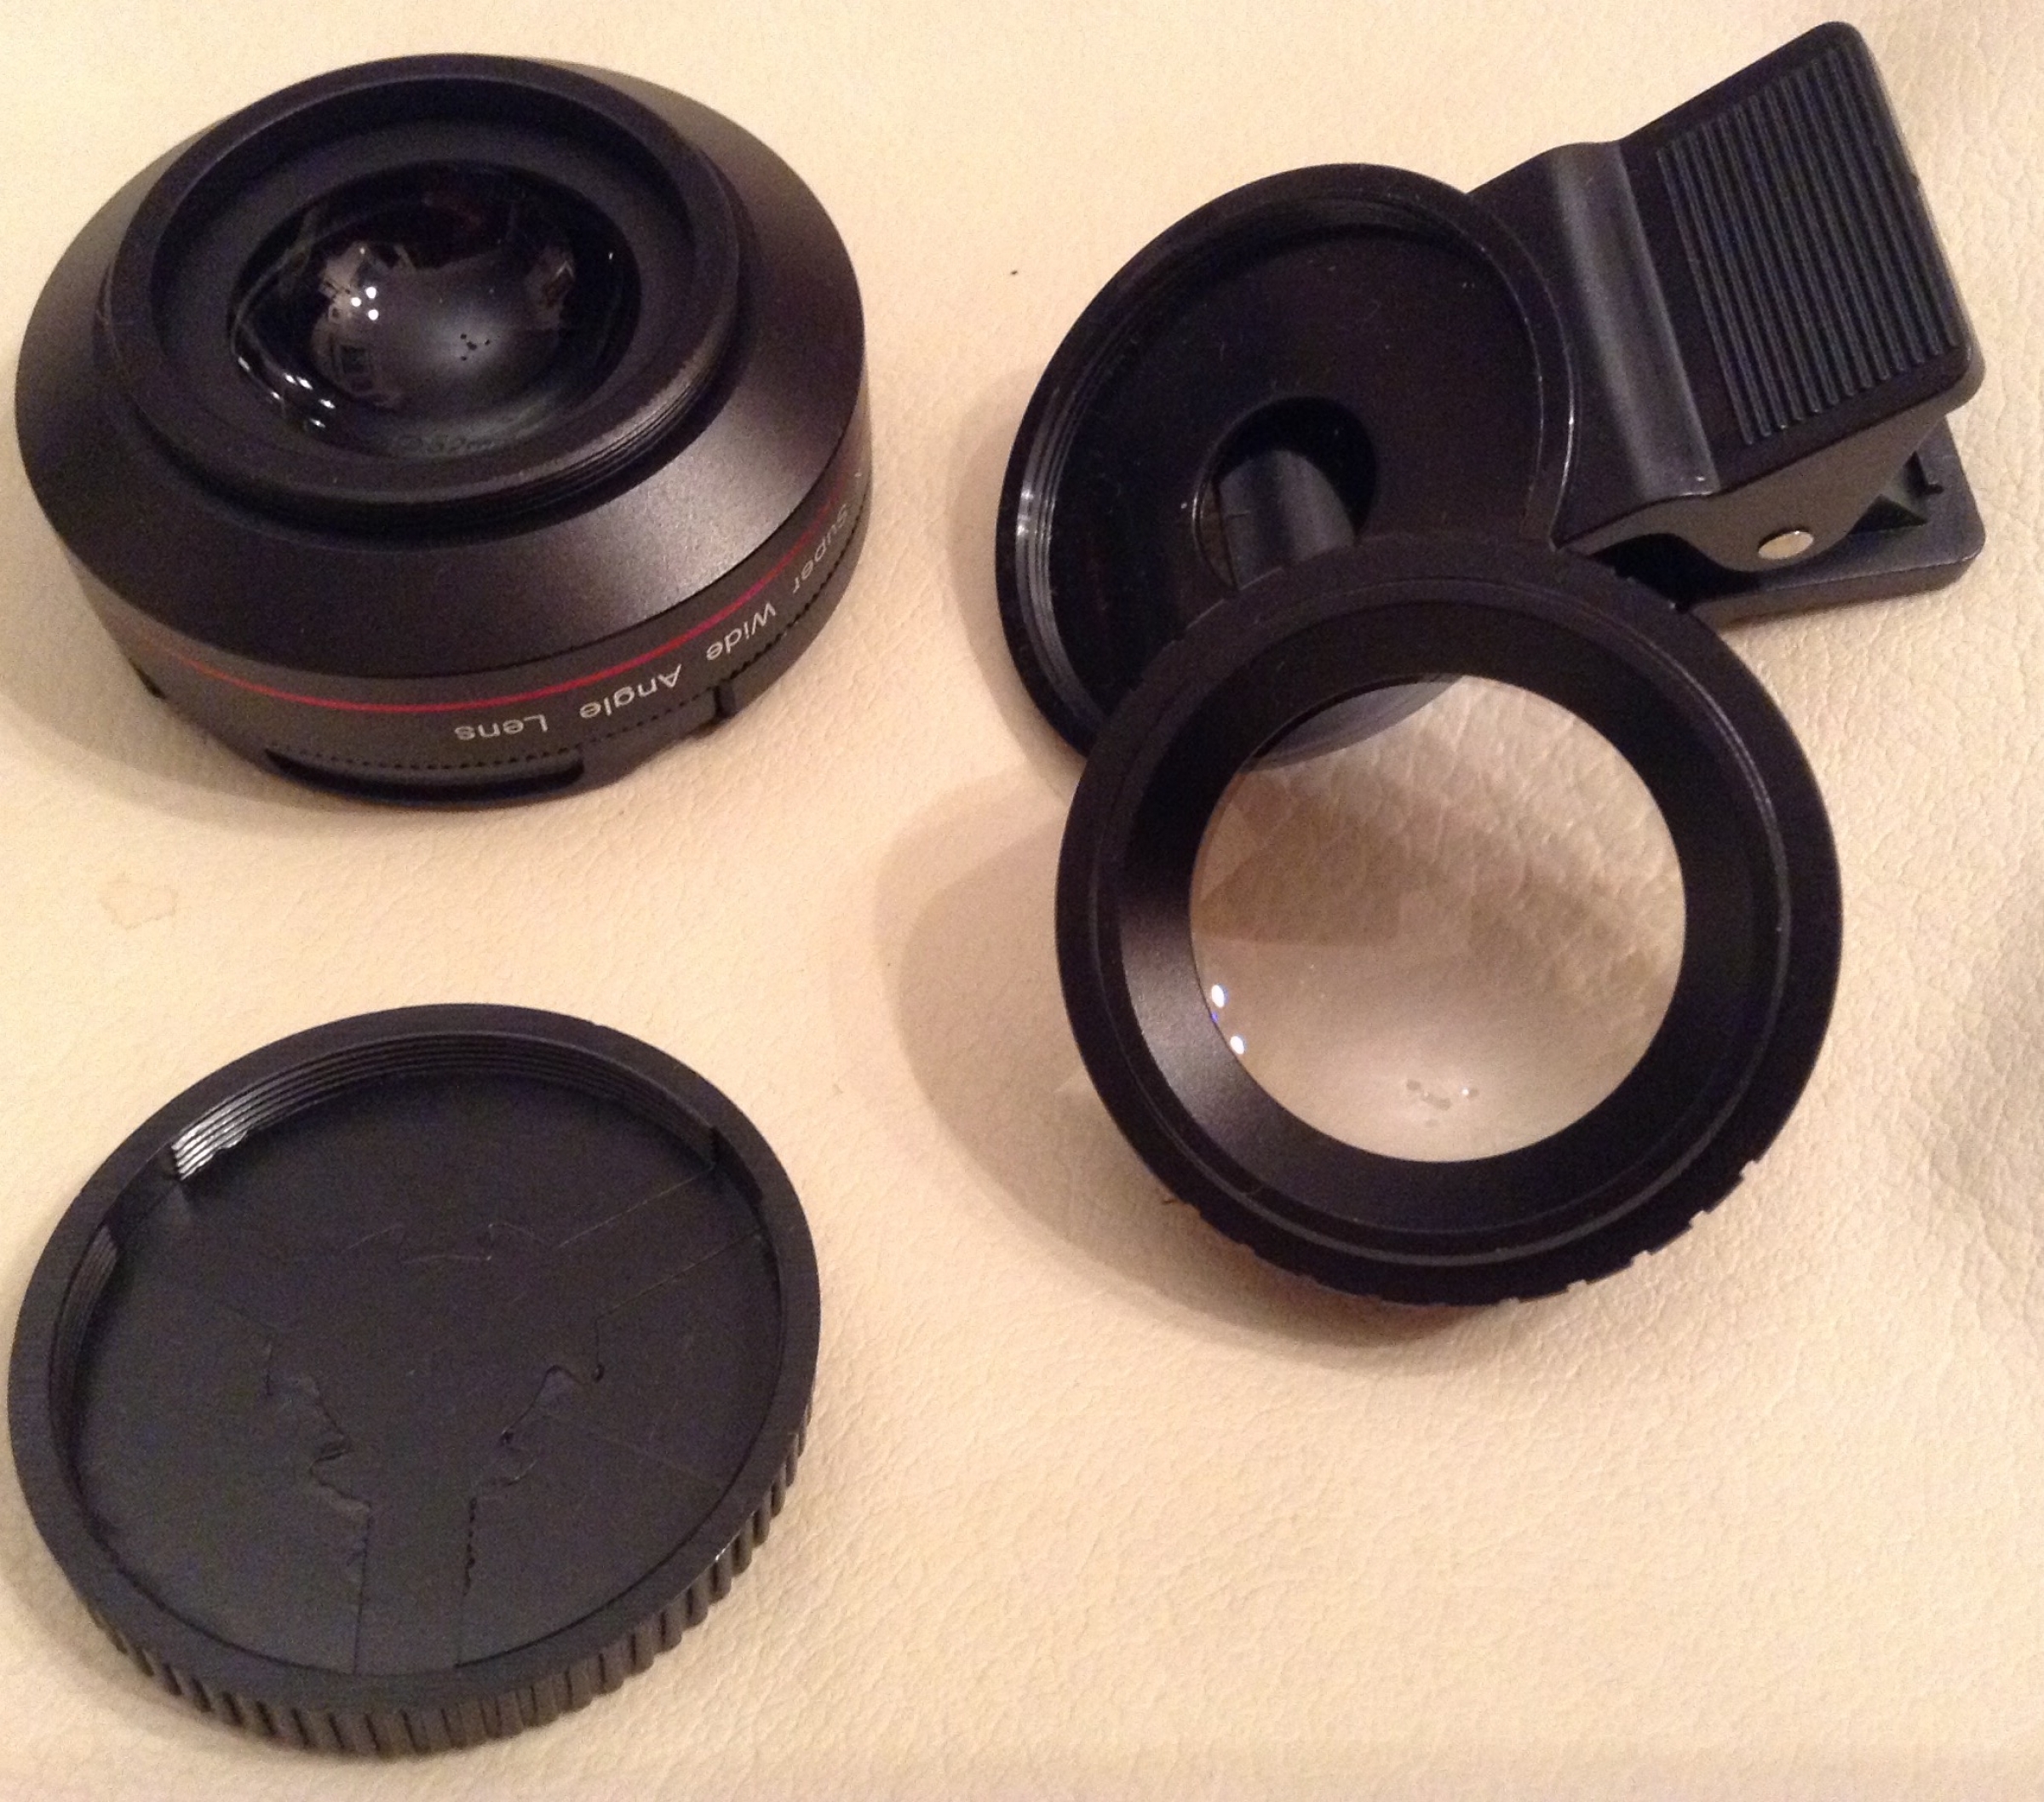 A Very Practical, Useful HD Camera Lens Kit for Professional and Hobby Use